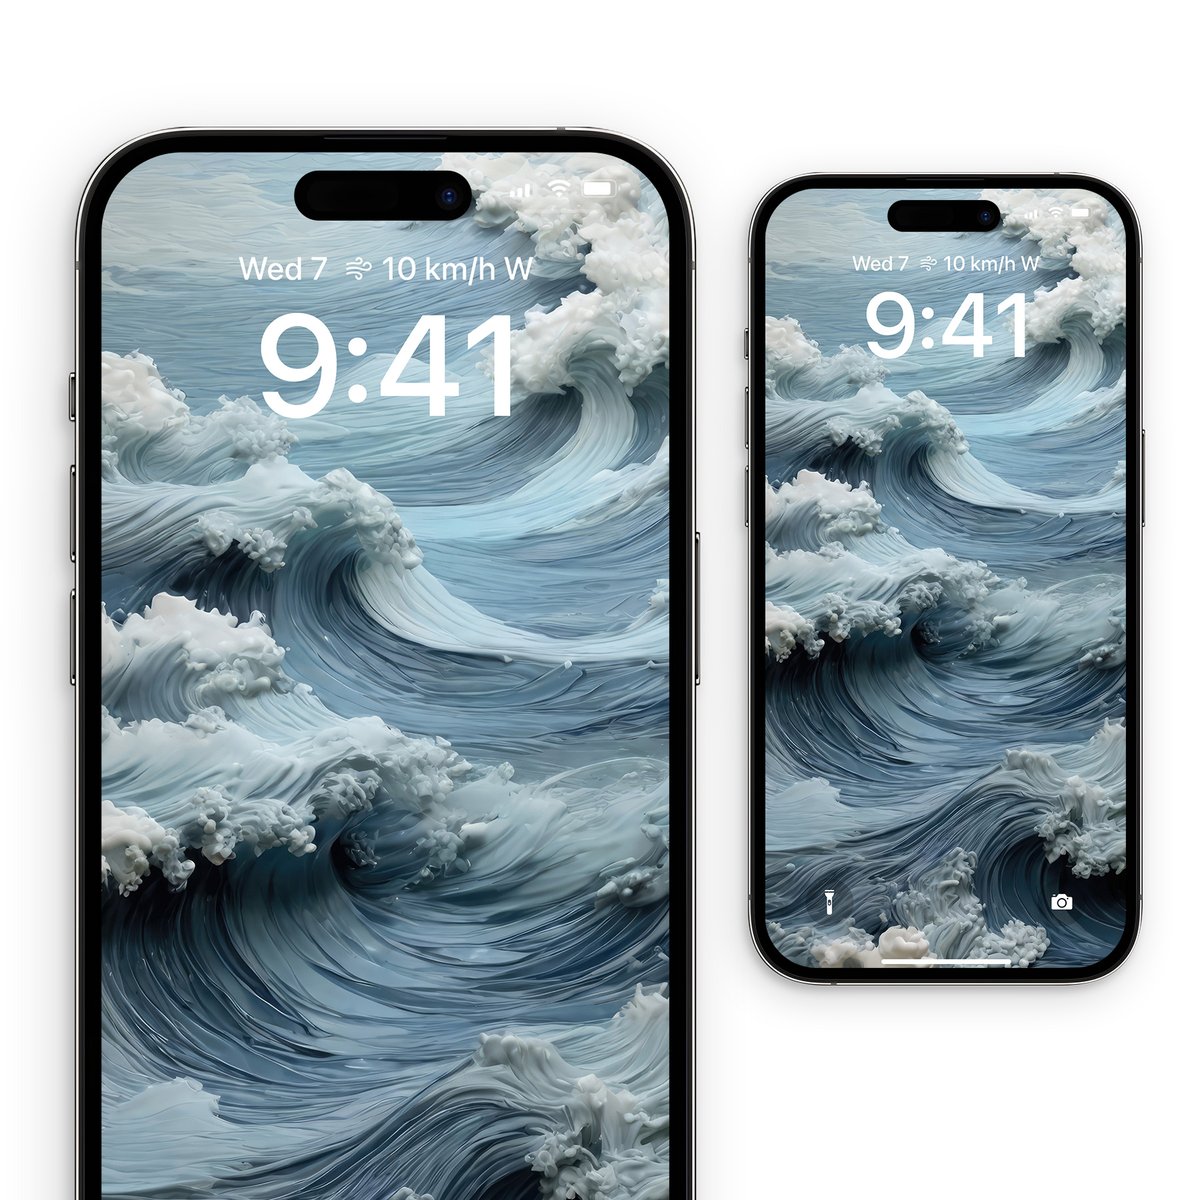 The surreal wave splash on your phone. 🌊

DOWNLOAD NOW: siriuxart.etsy.com/listing/167497…

Like RT & Follow for more awesome wallpapers👍💛

#wavewallpaper #phonewallpaper #waveart